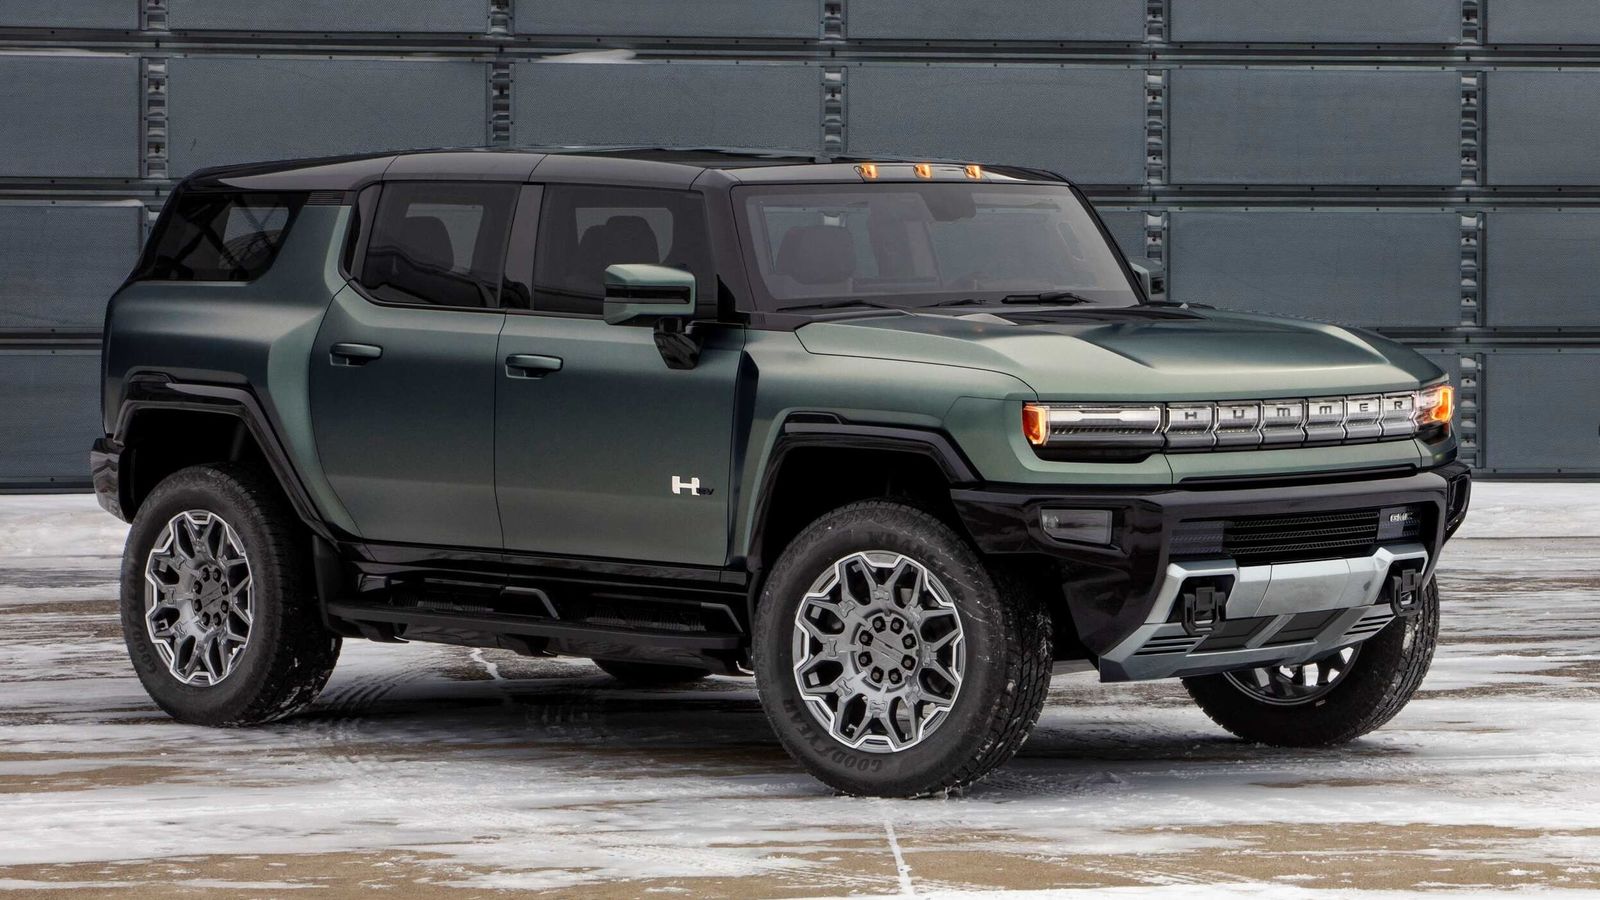 GMC unveils 2024 Hummer EV, an electric offroad SUV with a range of